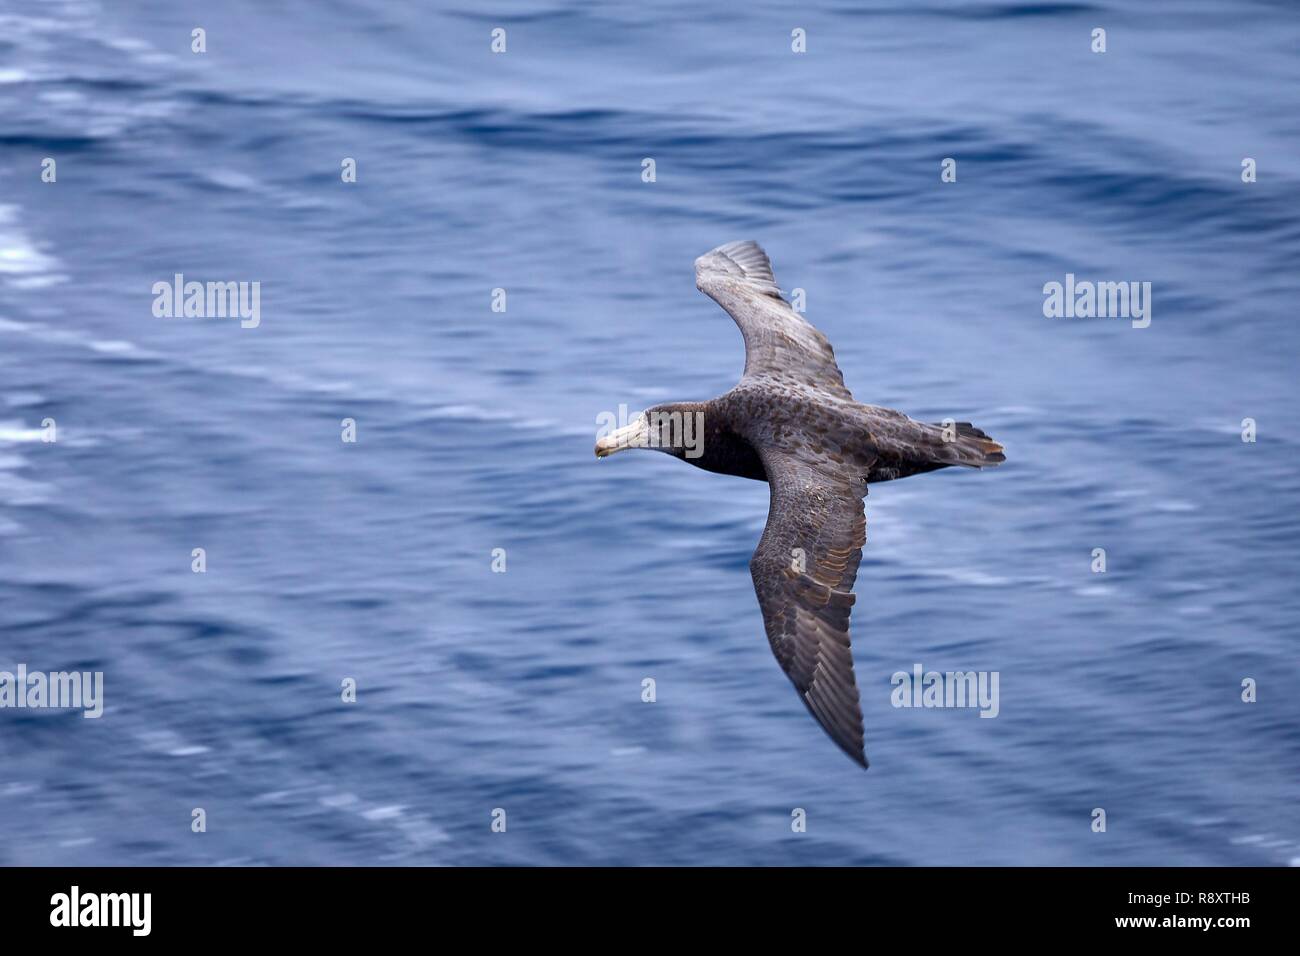 France, Indian Ocean, French Southern and Antarctic Lands, White-chinned Petrel (Procellaria aequinoctialis), picture taken aboard the Marion Dufresne (supply ship of French Southern and Antarctic Territories) underway from Crozet Islands to Kerguelen Islands Stock Photo